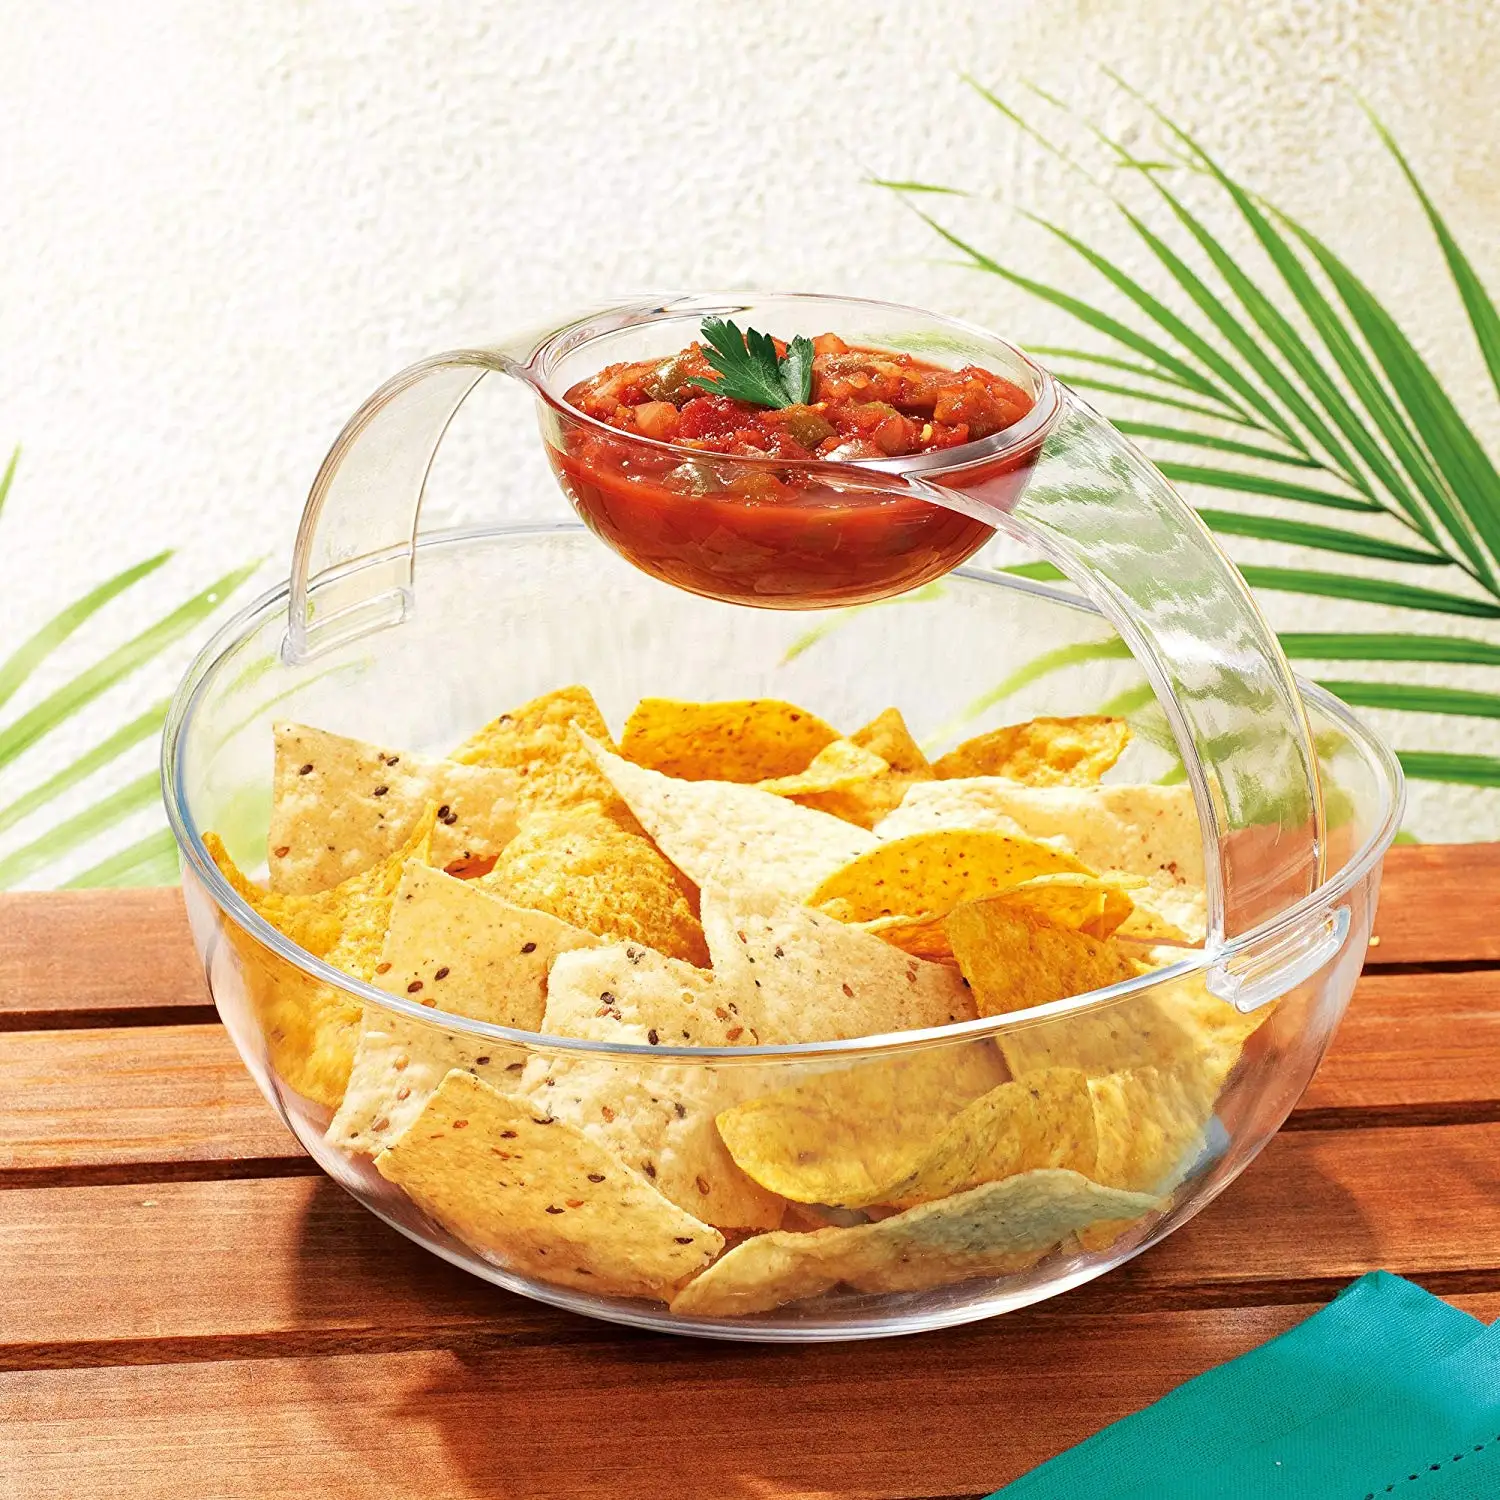 Attractive Acrylic Chip and Dip Plate, Appetizer Platter - Great for Chips,...